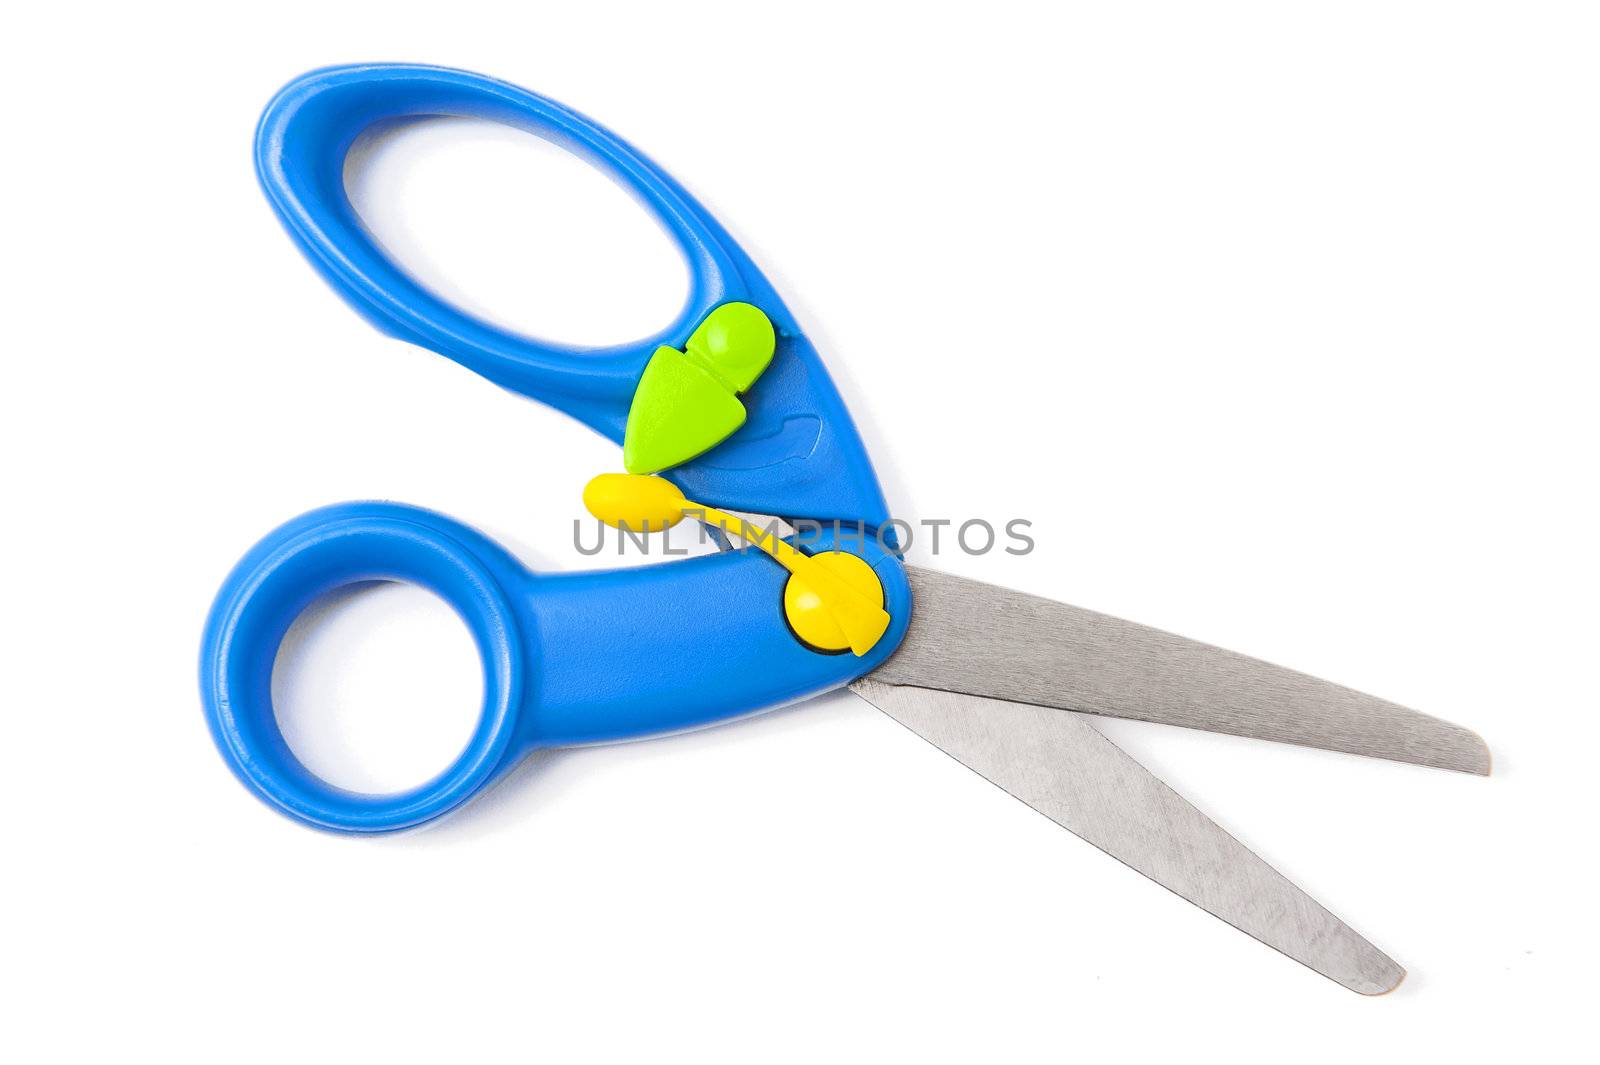 Scissors isolated on the white background